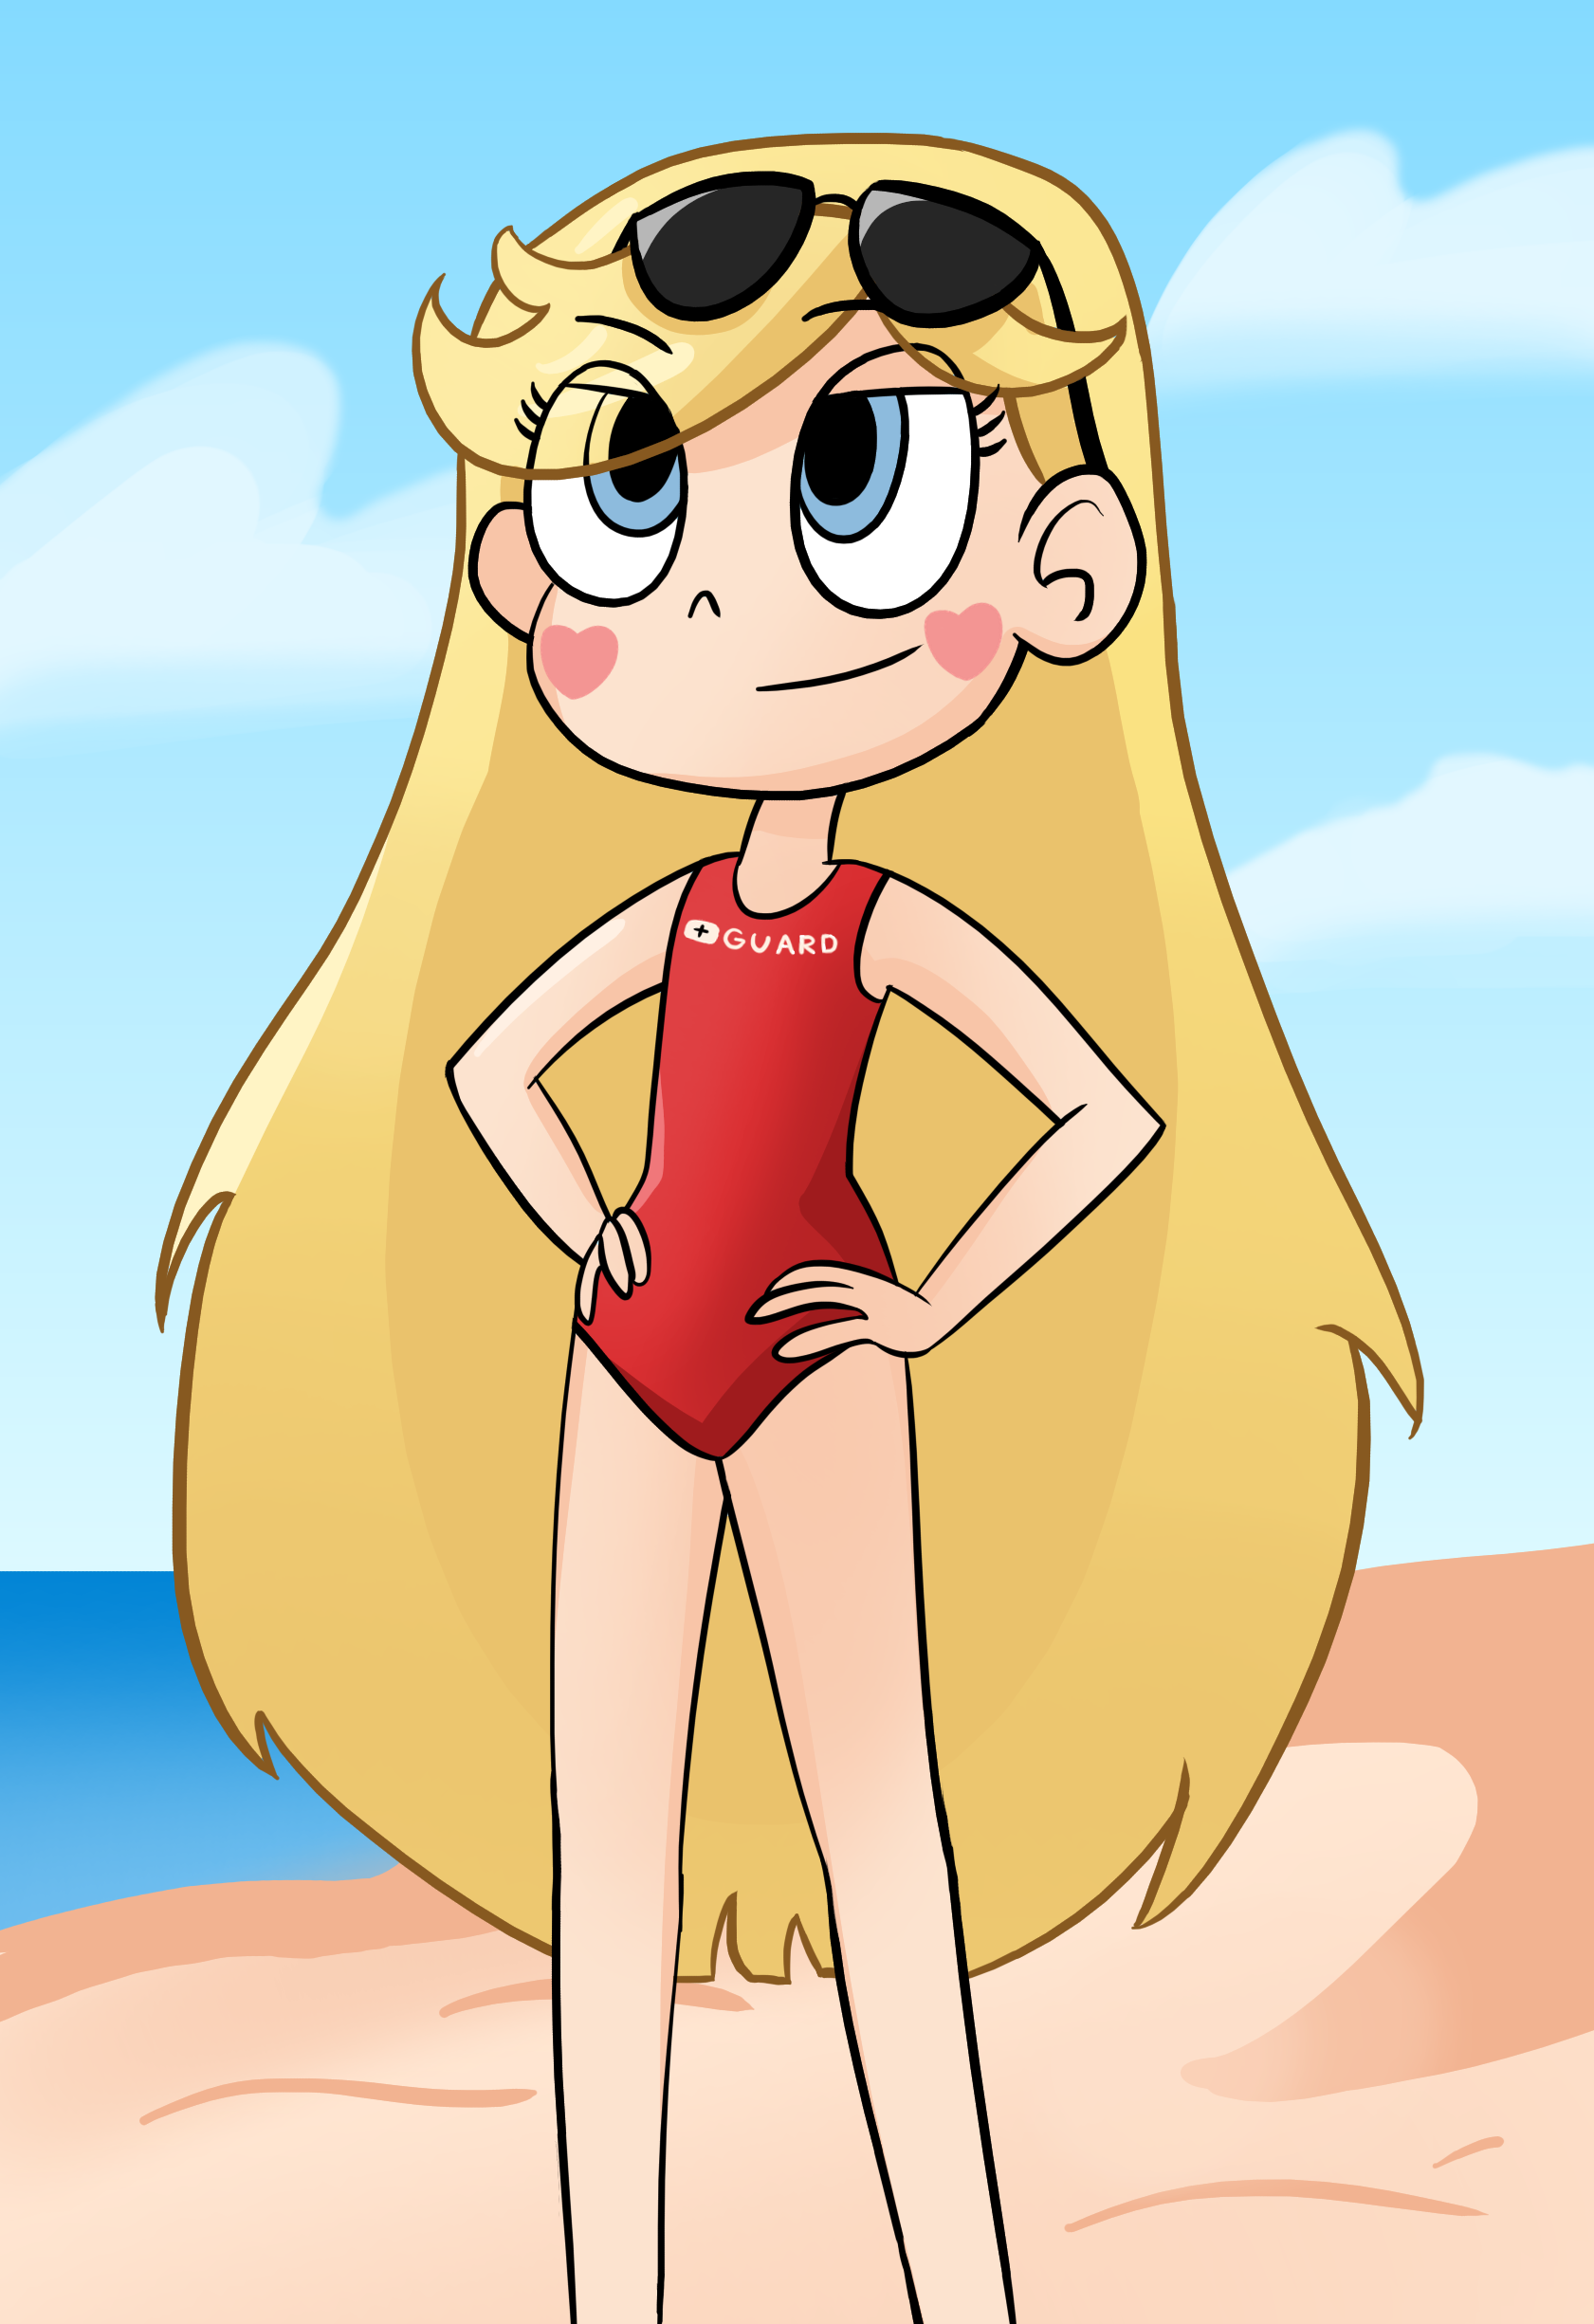 A drawing of a girl with long blond hair. There are black sunglasses on top of her head, and small pink hearts on her cheeks. She is dressed in a red swimsuit that says "lifeguard". The background appears to be a beach scene.